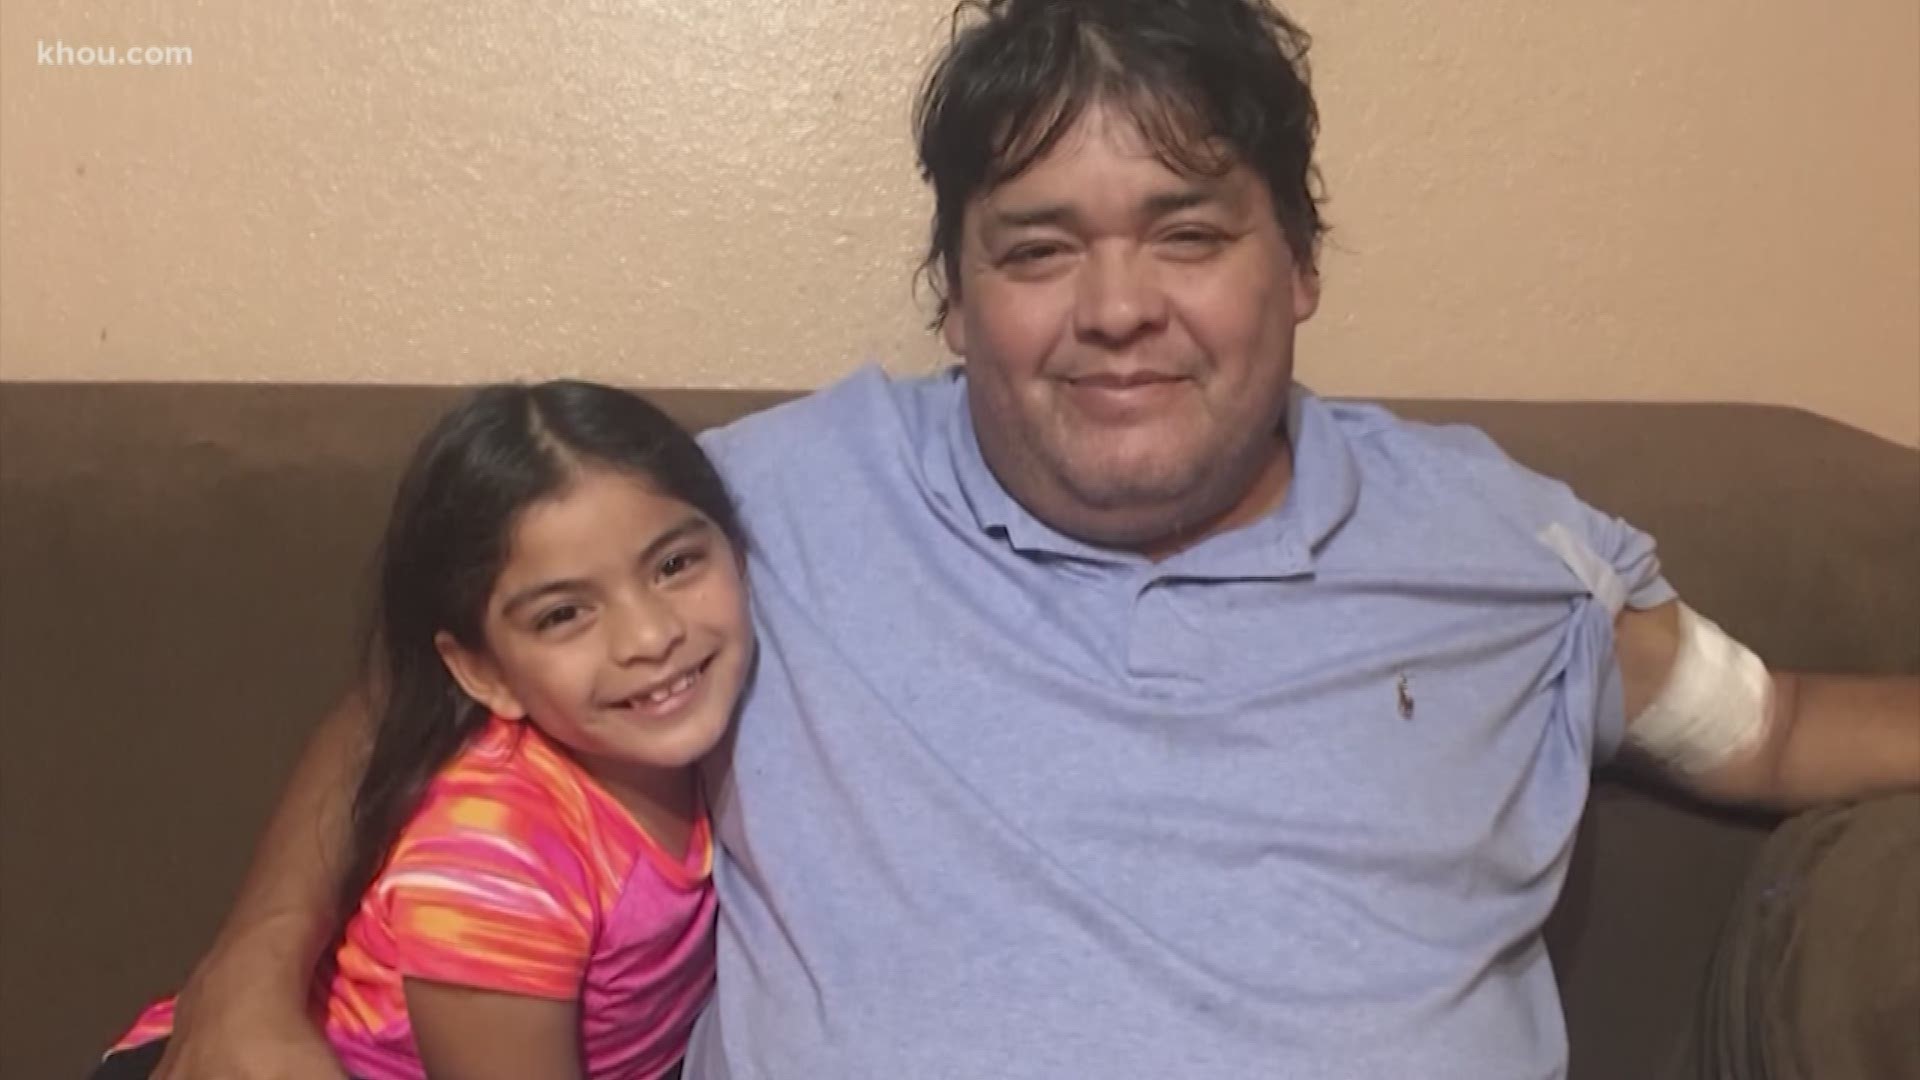 Betzabe Gomez and her family are finally getting a new home. A big reason for the repairs is Betzabe's dad, who was very sick. KHOU 11’s Melissa Correa shares the bi